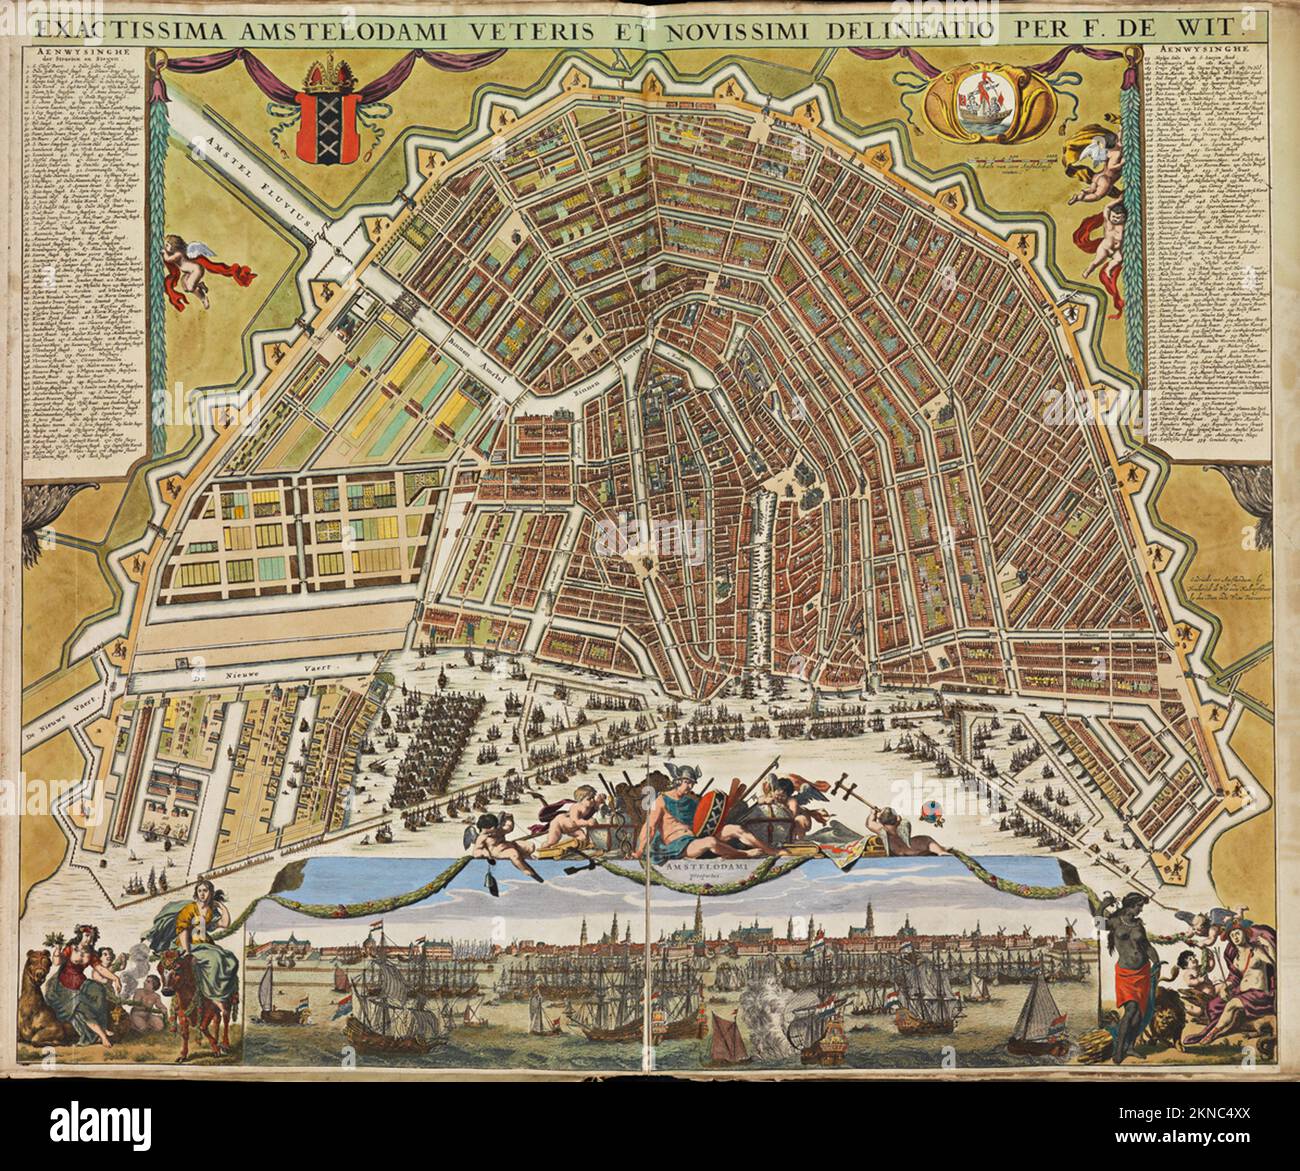 Vintage city plan of Amsterdam and area around it from 16th-18th century. Maps are beautifully hand illustrated and engraved showing it at the time. Stock Photo